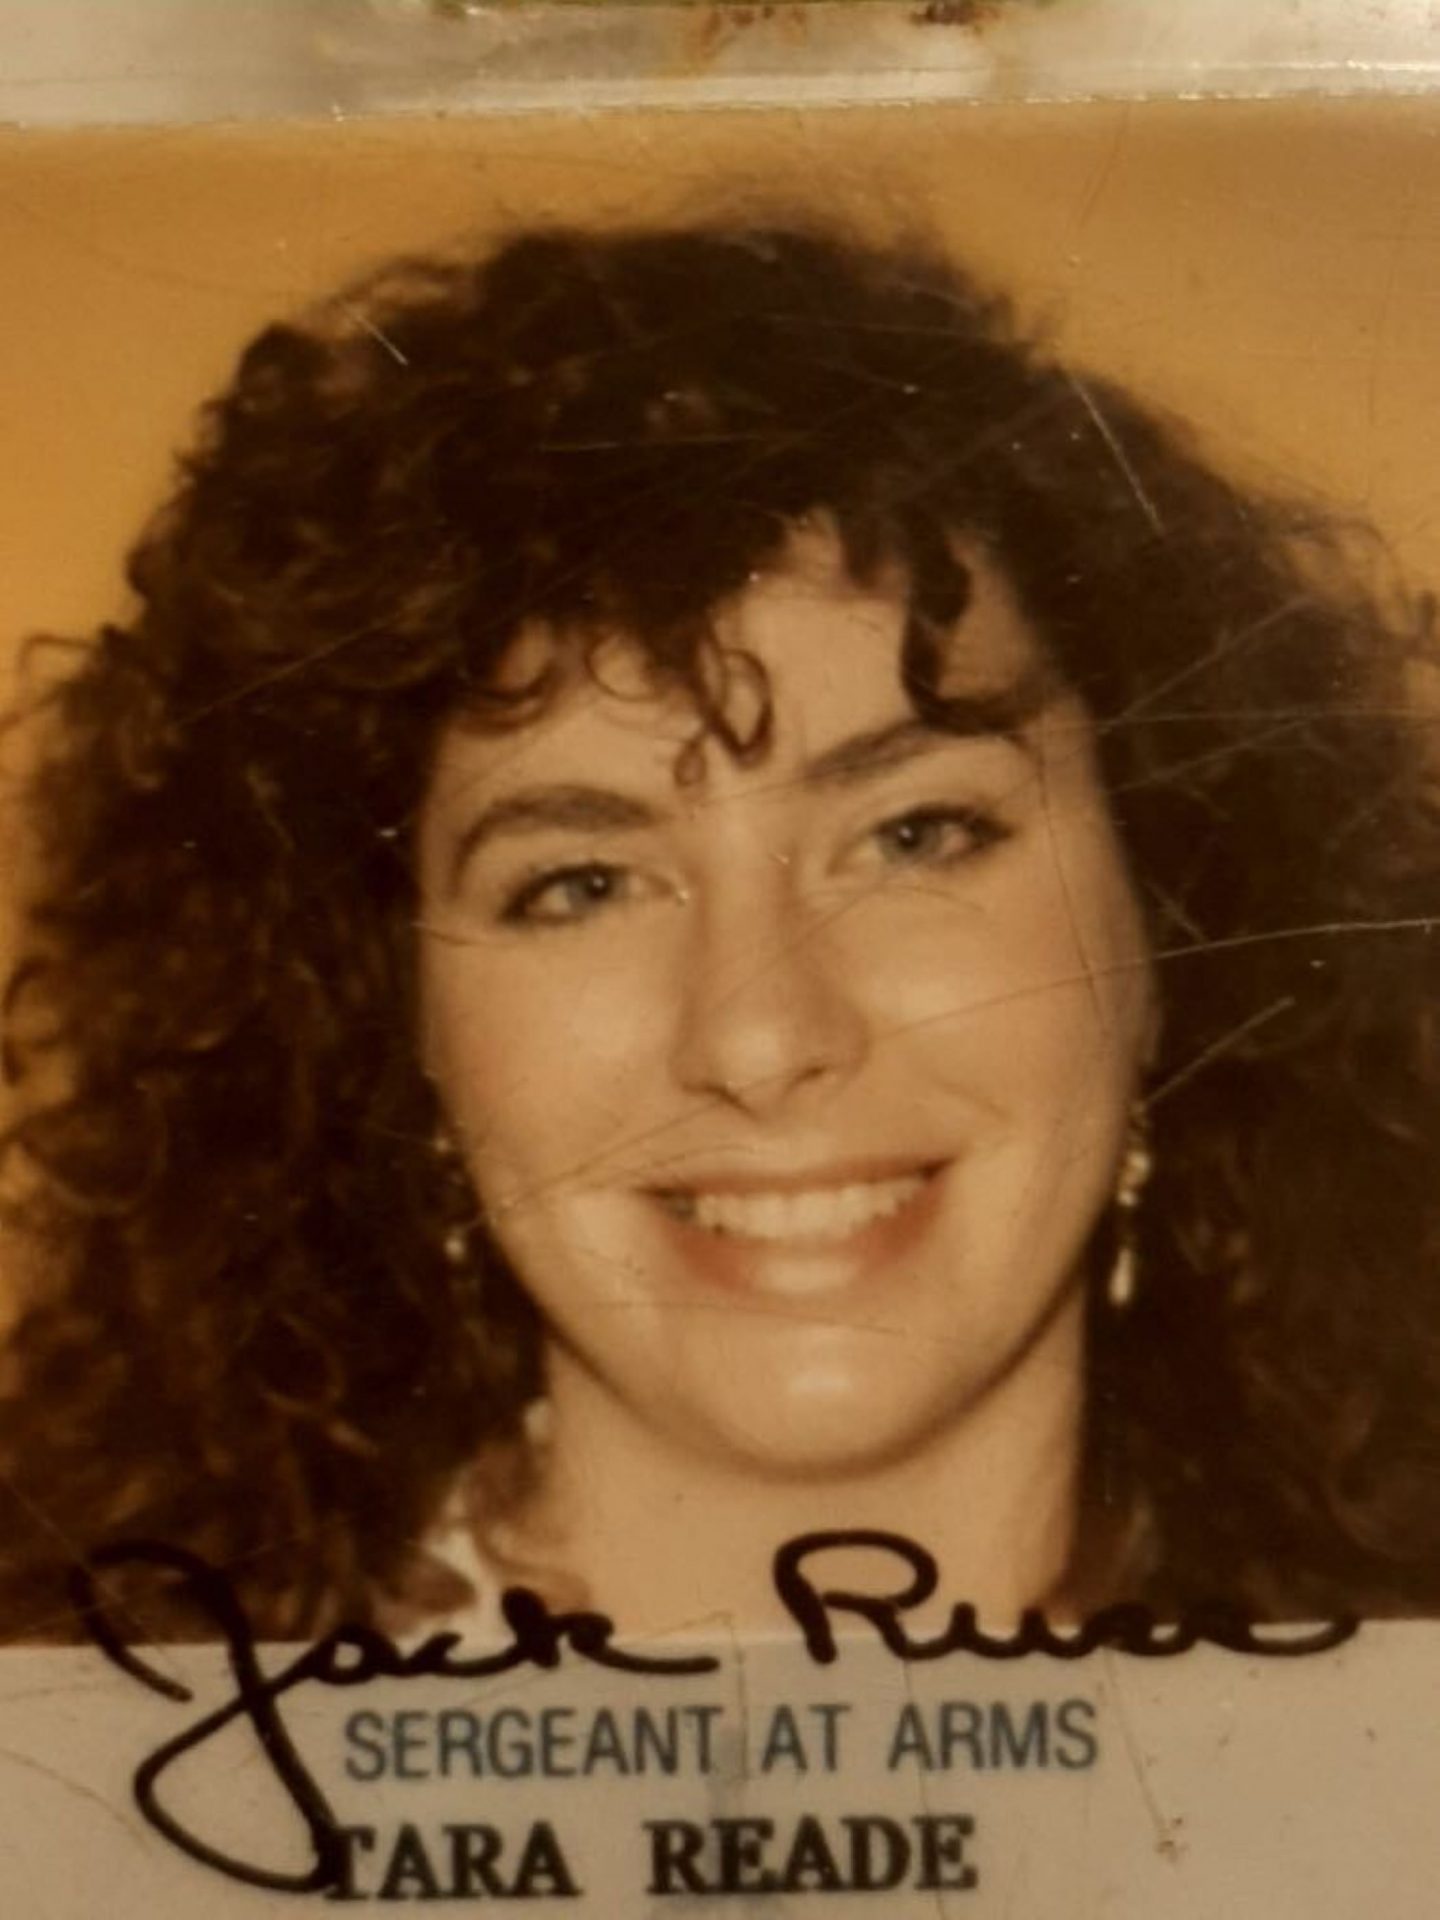 Tara Reade's congressional identification card from the early 1990s. Records show she worked in Joe Biden's Senate office for about nine months.